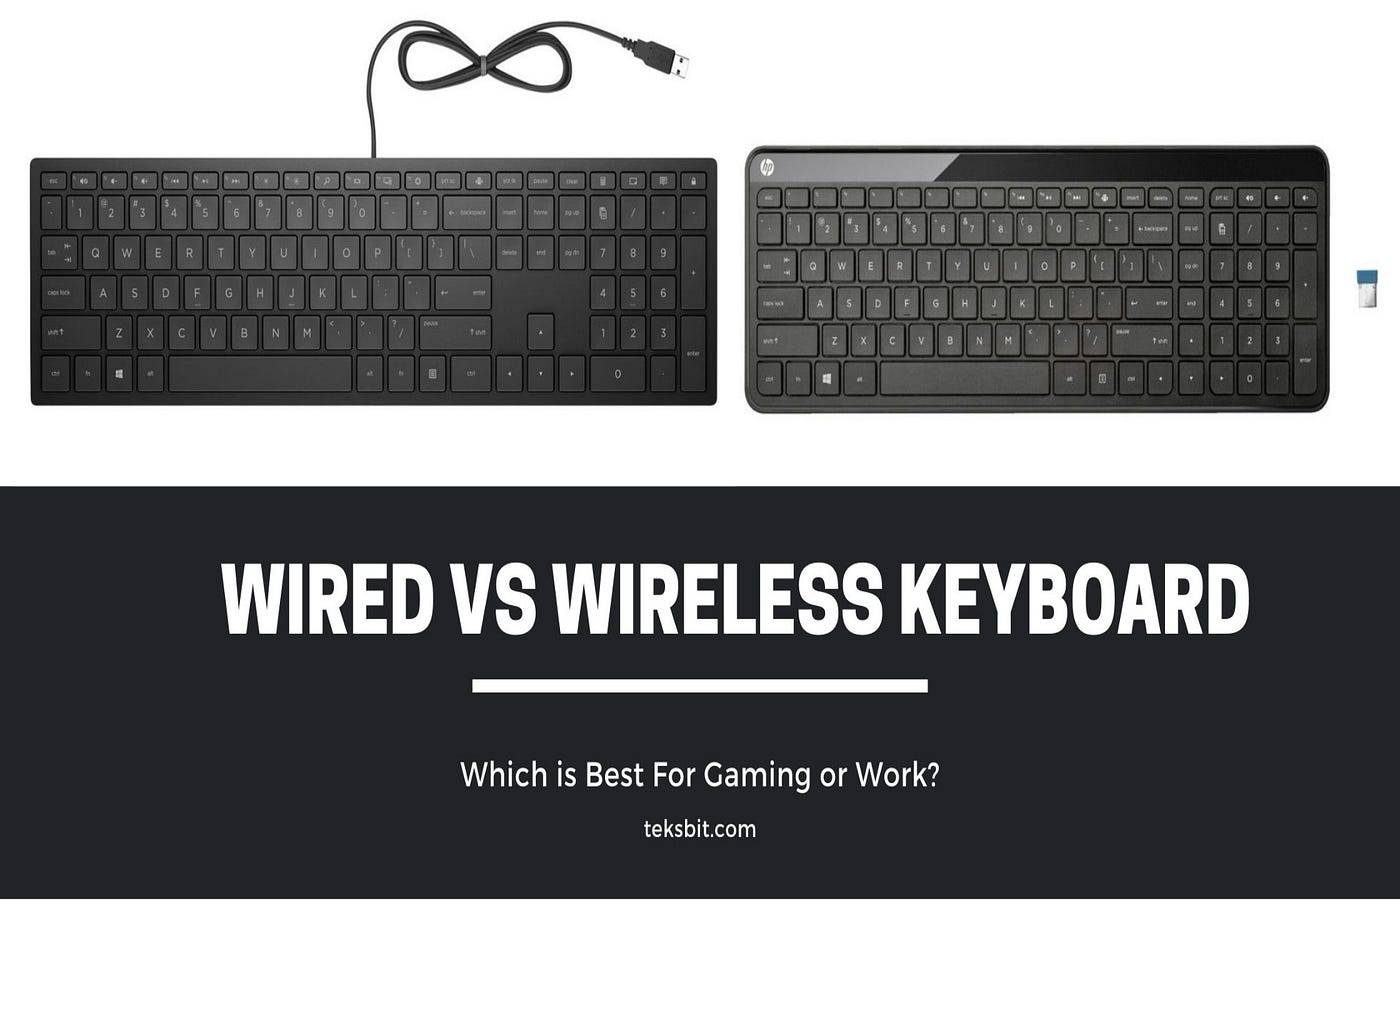 Wired vs Wireless keyboard: Which is Best For Gaming or Work?